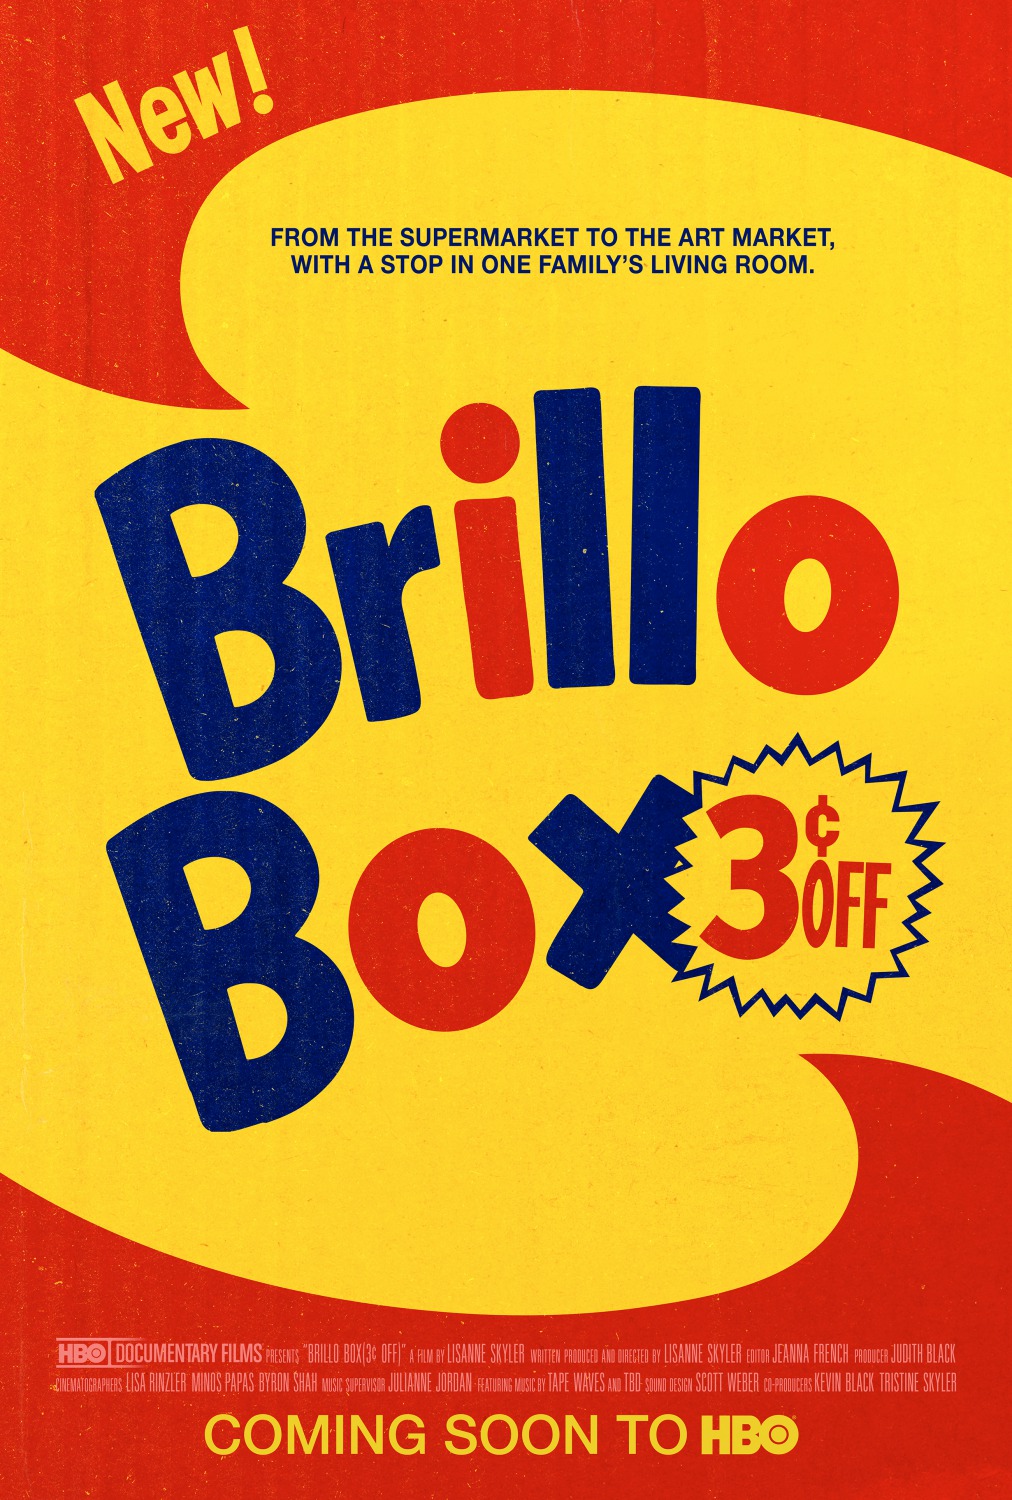 Extra Large TV Poster Image for Brillo Box (3 ¢ off) 